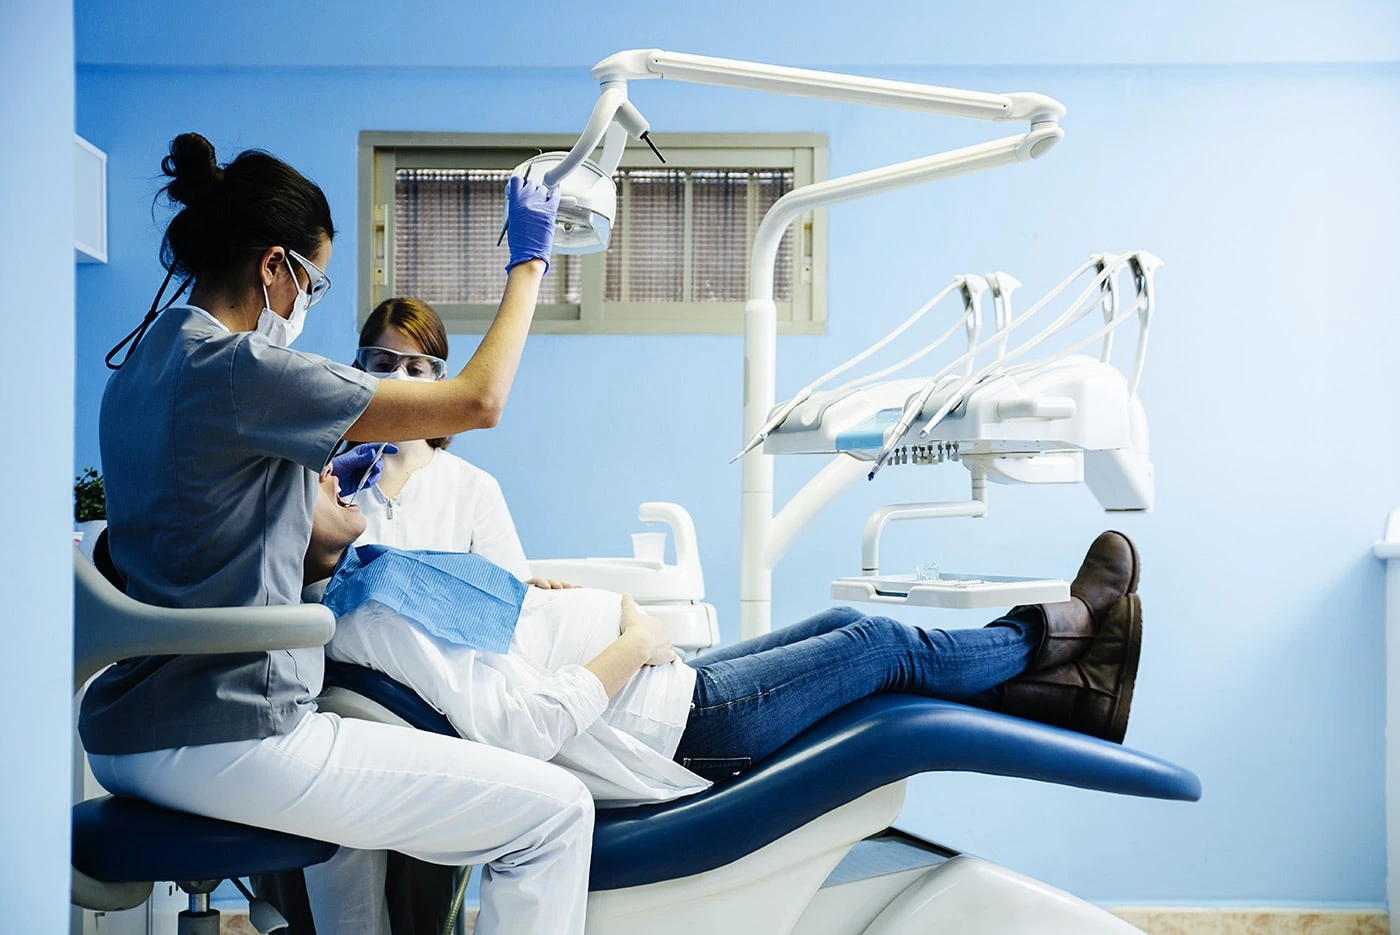 A dental surgeon, assistant, and patient in a dental chair with surgical tools, showcasing expertise and precision in the procedure.